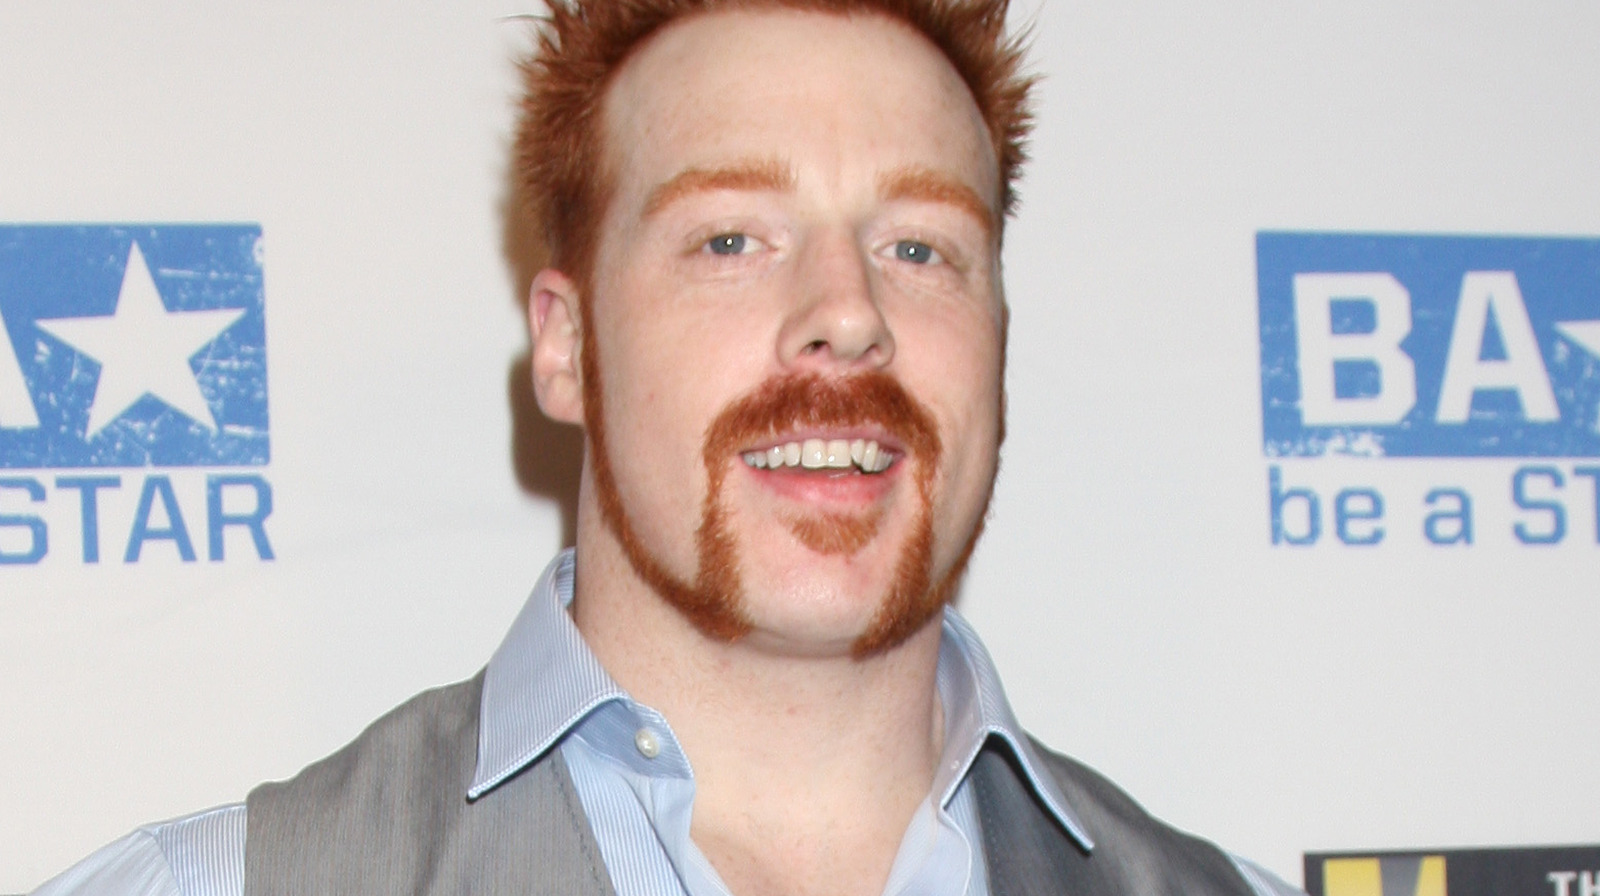 A Lot Of Backstage Heat Erupted After Sheamus' First WWE Championship Win